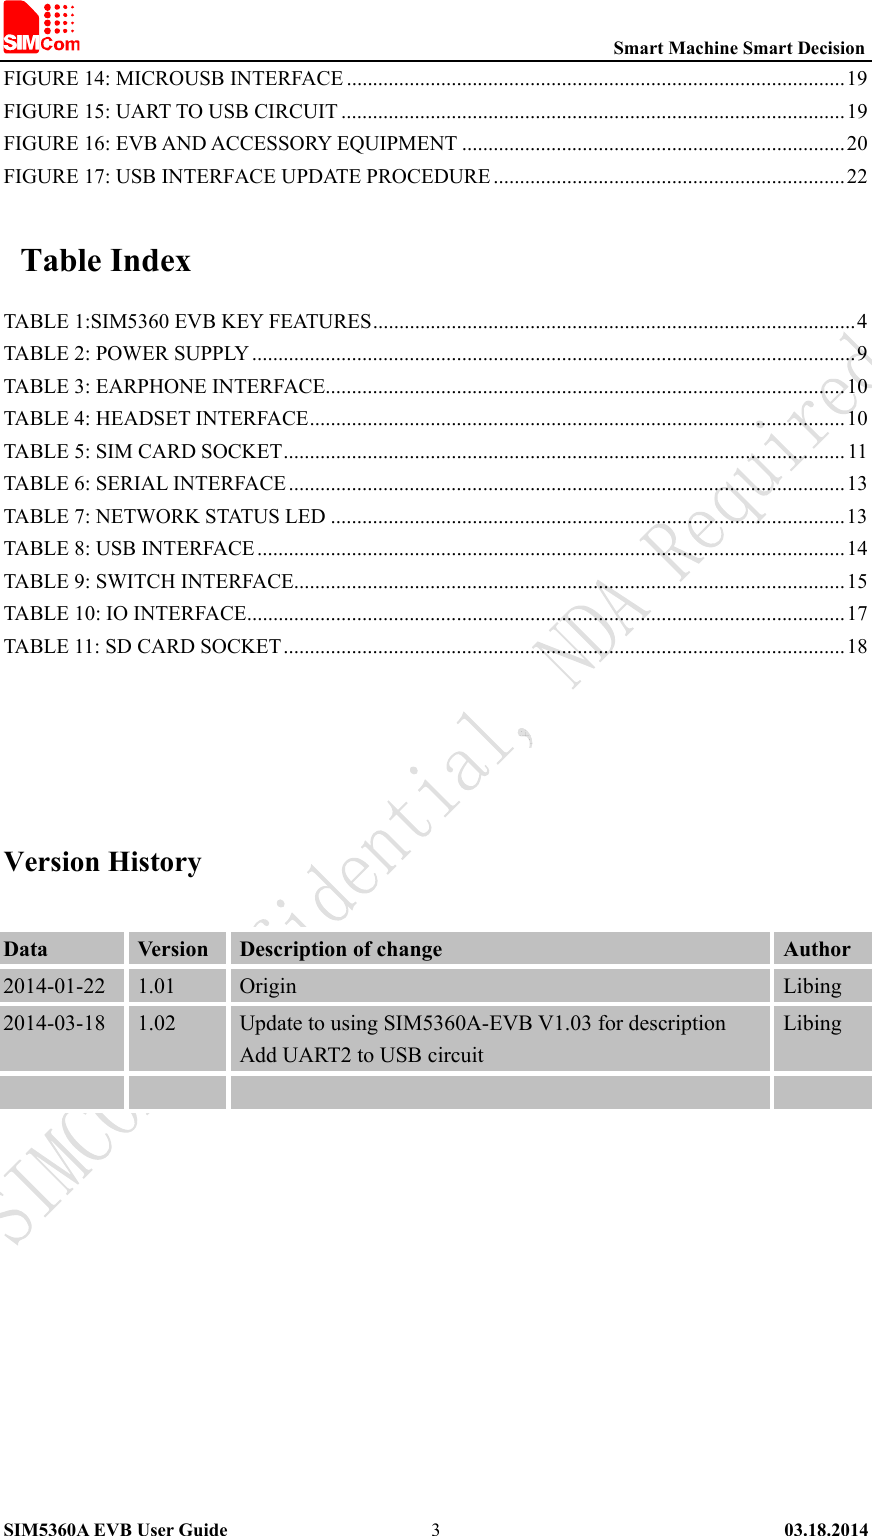                                                          Smart Machine Smart Decision SIM5360A EVB User Guide   03.18.2014   3FIGURE 14: MICROUSB INTERFACE ............................................................................................... 19 FIGURE 15: UART TO USB CIRCUIT ................................................................................................ 19 FIGURE 16: EVB AND ACCESSORY EQUIPMENT ......................................................................... 20 FIGURE 17: USB INTERFACE UPDATE PROCEDURE ................................................................... 22   Table Index TABLE 1:SIM5360 EVB KEY FEATURES ............................................................................................ 4 TABLE 2: POWER SUPPLY ................................................................................................................... 9 TABLE 3: EARPHONE INTERFACE ................................................................................................... 10 TABLE 4: HEADSET INTERFACE ...................................................................................................... 10 TABLE 5: SIM CARD SOCKET ........................................................................................................... 11 TABLE 6: SERIAL INTERFACE .......................................................................................................... 13 TABLE 7: NETWORK STATUS LED .................................................................................................. 1 3  TABLE 8: USB INTERFACE ................................................................................................................ 14 TABLE 9: SWITCH INTERFACE ......................................................................................................... 15 TABLE 10: IO INTERFACE .................................................................................................................. 17 TABLE 11: SD CARD SOCKET ........................................................................................................... 18     Version History Data  Version  Description of change  Author 2014-01-22  1.01  Origin  Libing 2014-03-18 1.02 Update to using SIM5360A-EVB V1.03 for description   Add UART2 to USB circuit Libing        